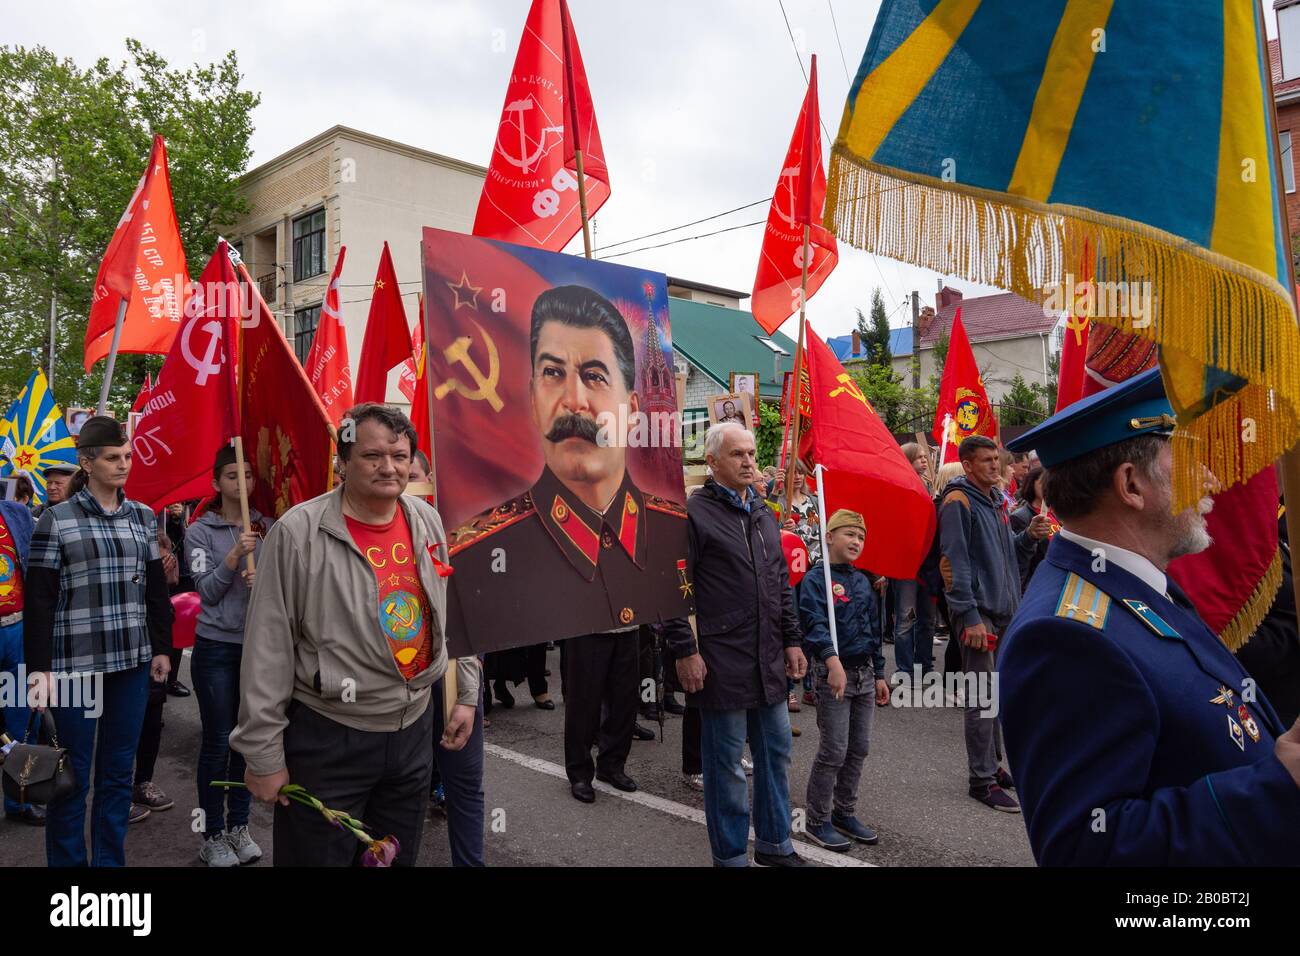 Anapa, Russia - May 9, 2019: People carry a portrait of Joseph Stalin along the streets of Anapa, at a festive procession dedicated to Victory Day on Stock Photo